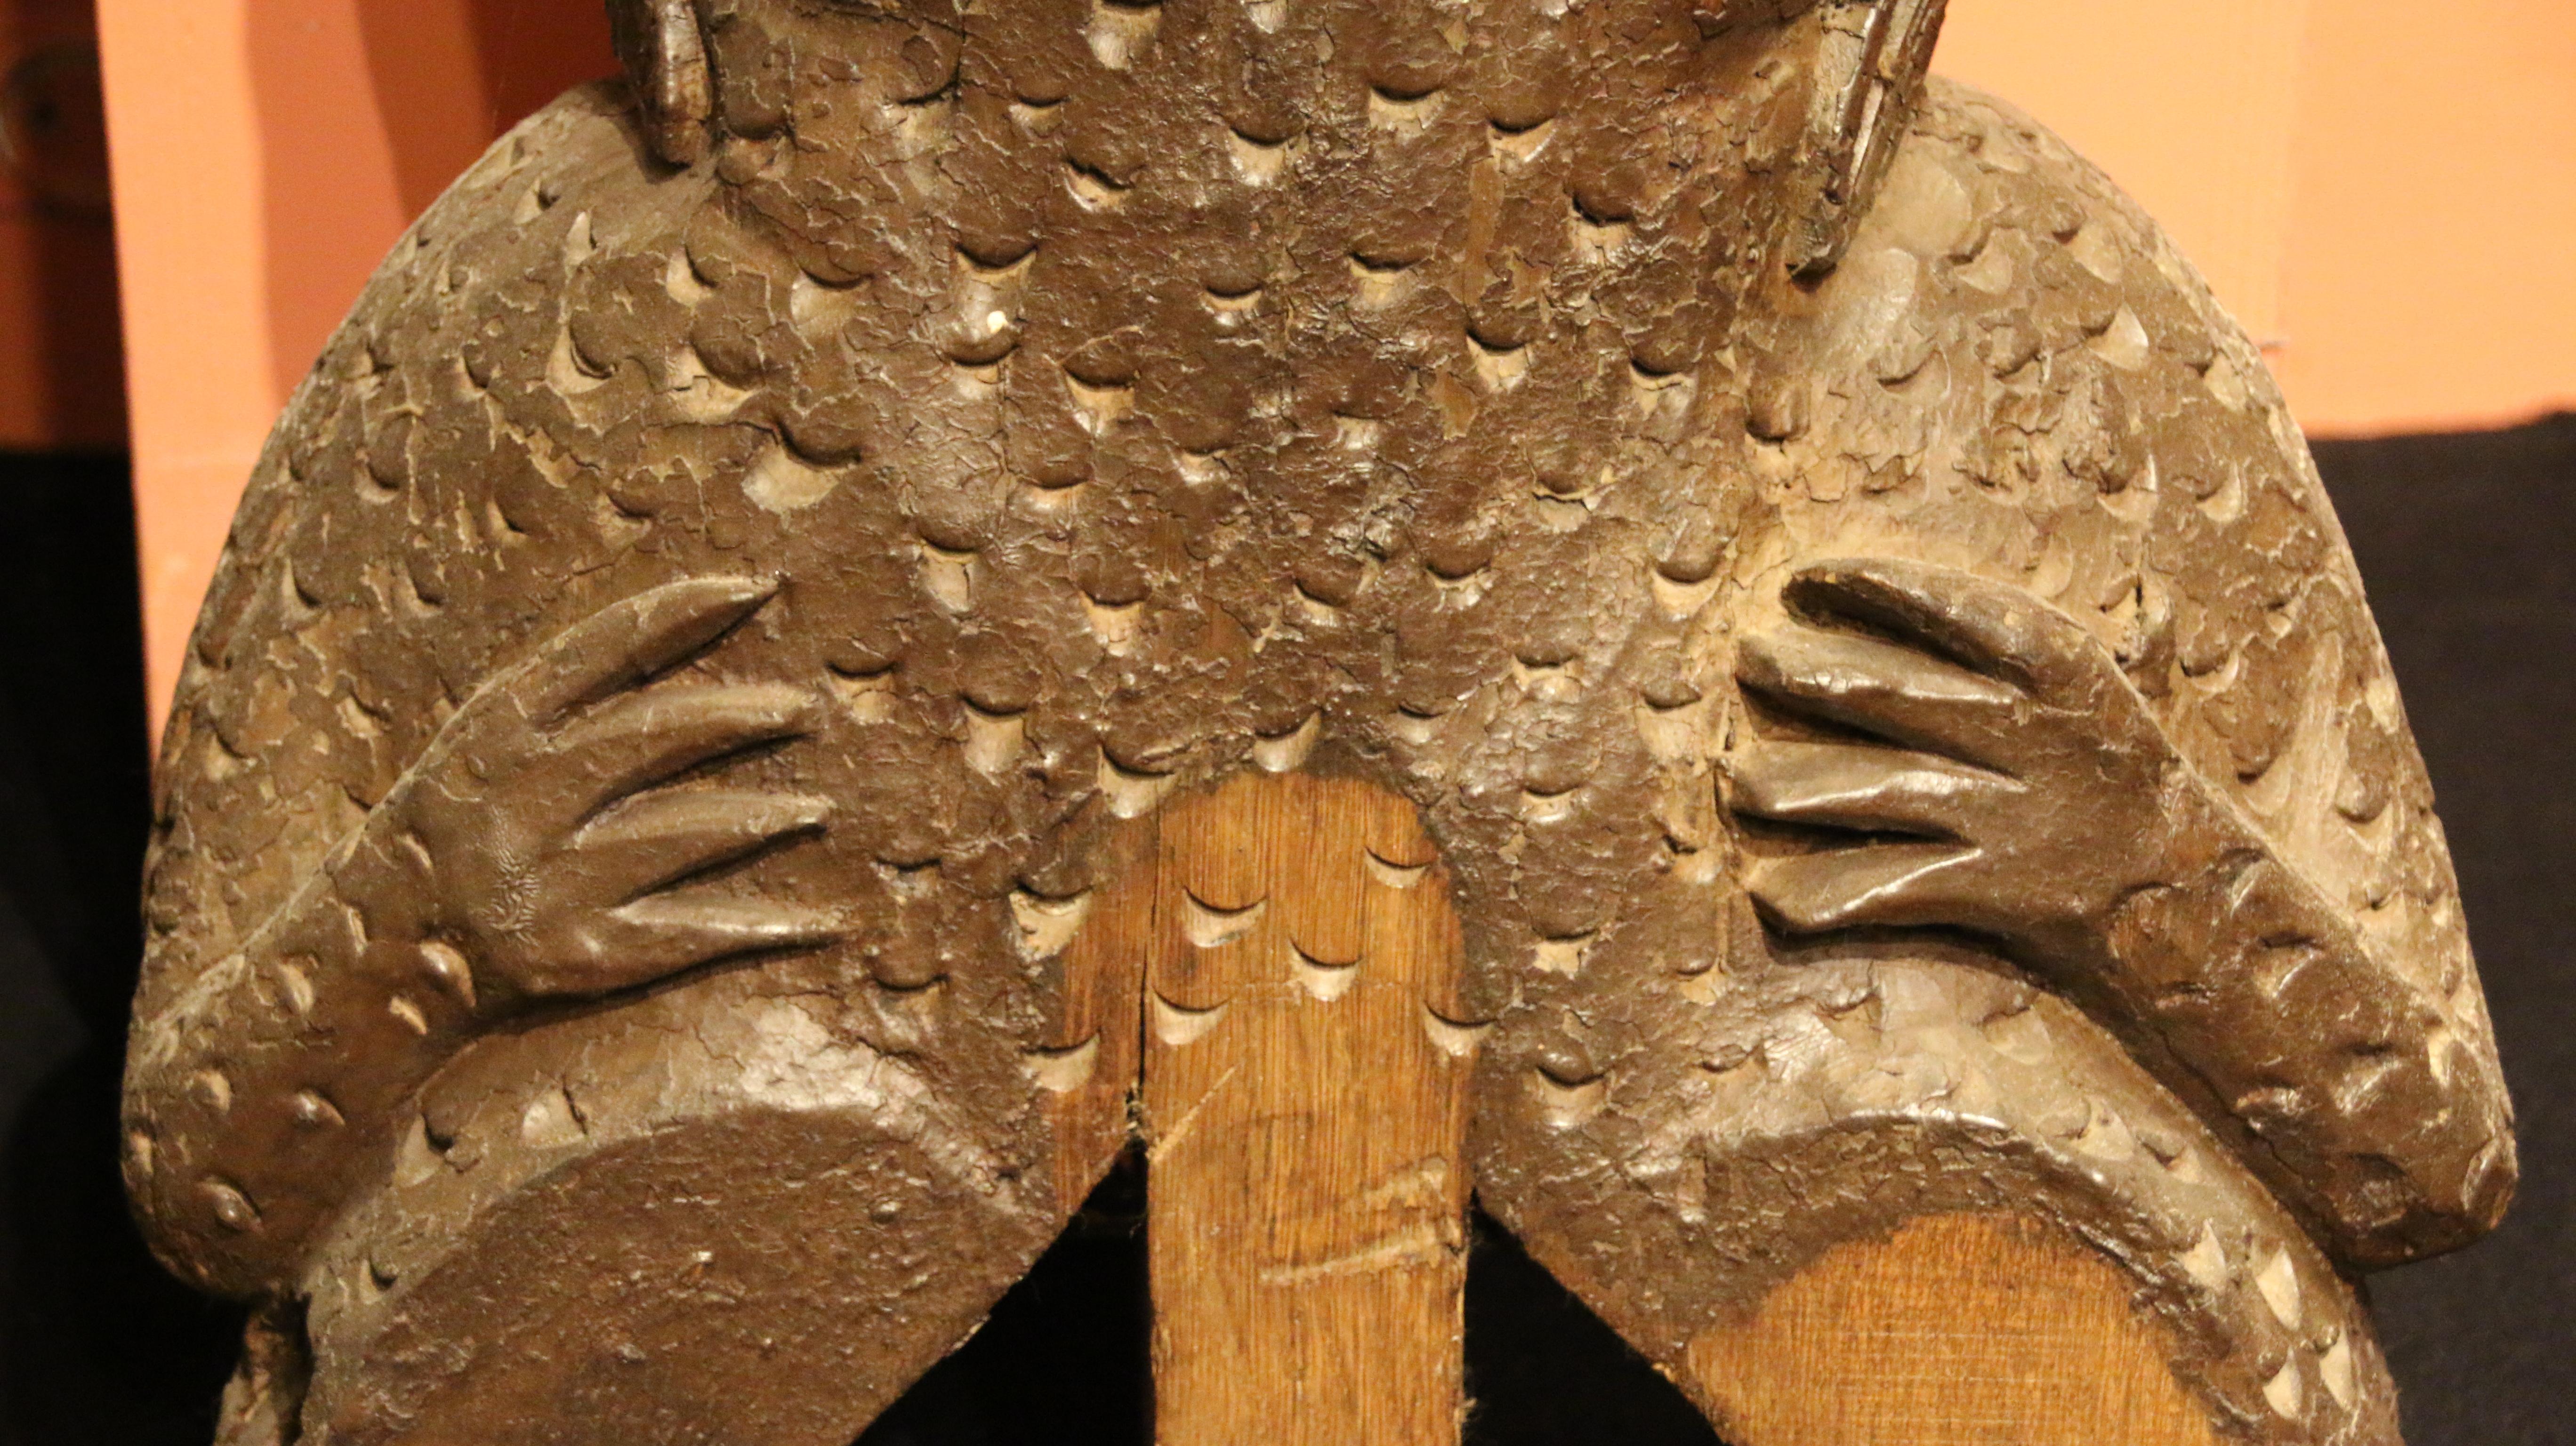 This carved oak woodwork was probably placed on the facade of the house, close to the roofing framework of a Norman house. The sculptor had depicted the salamender frontview in a stylised manner. The scales and the neck fringes are particularly